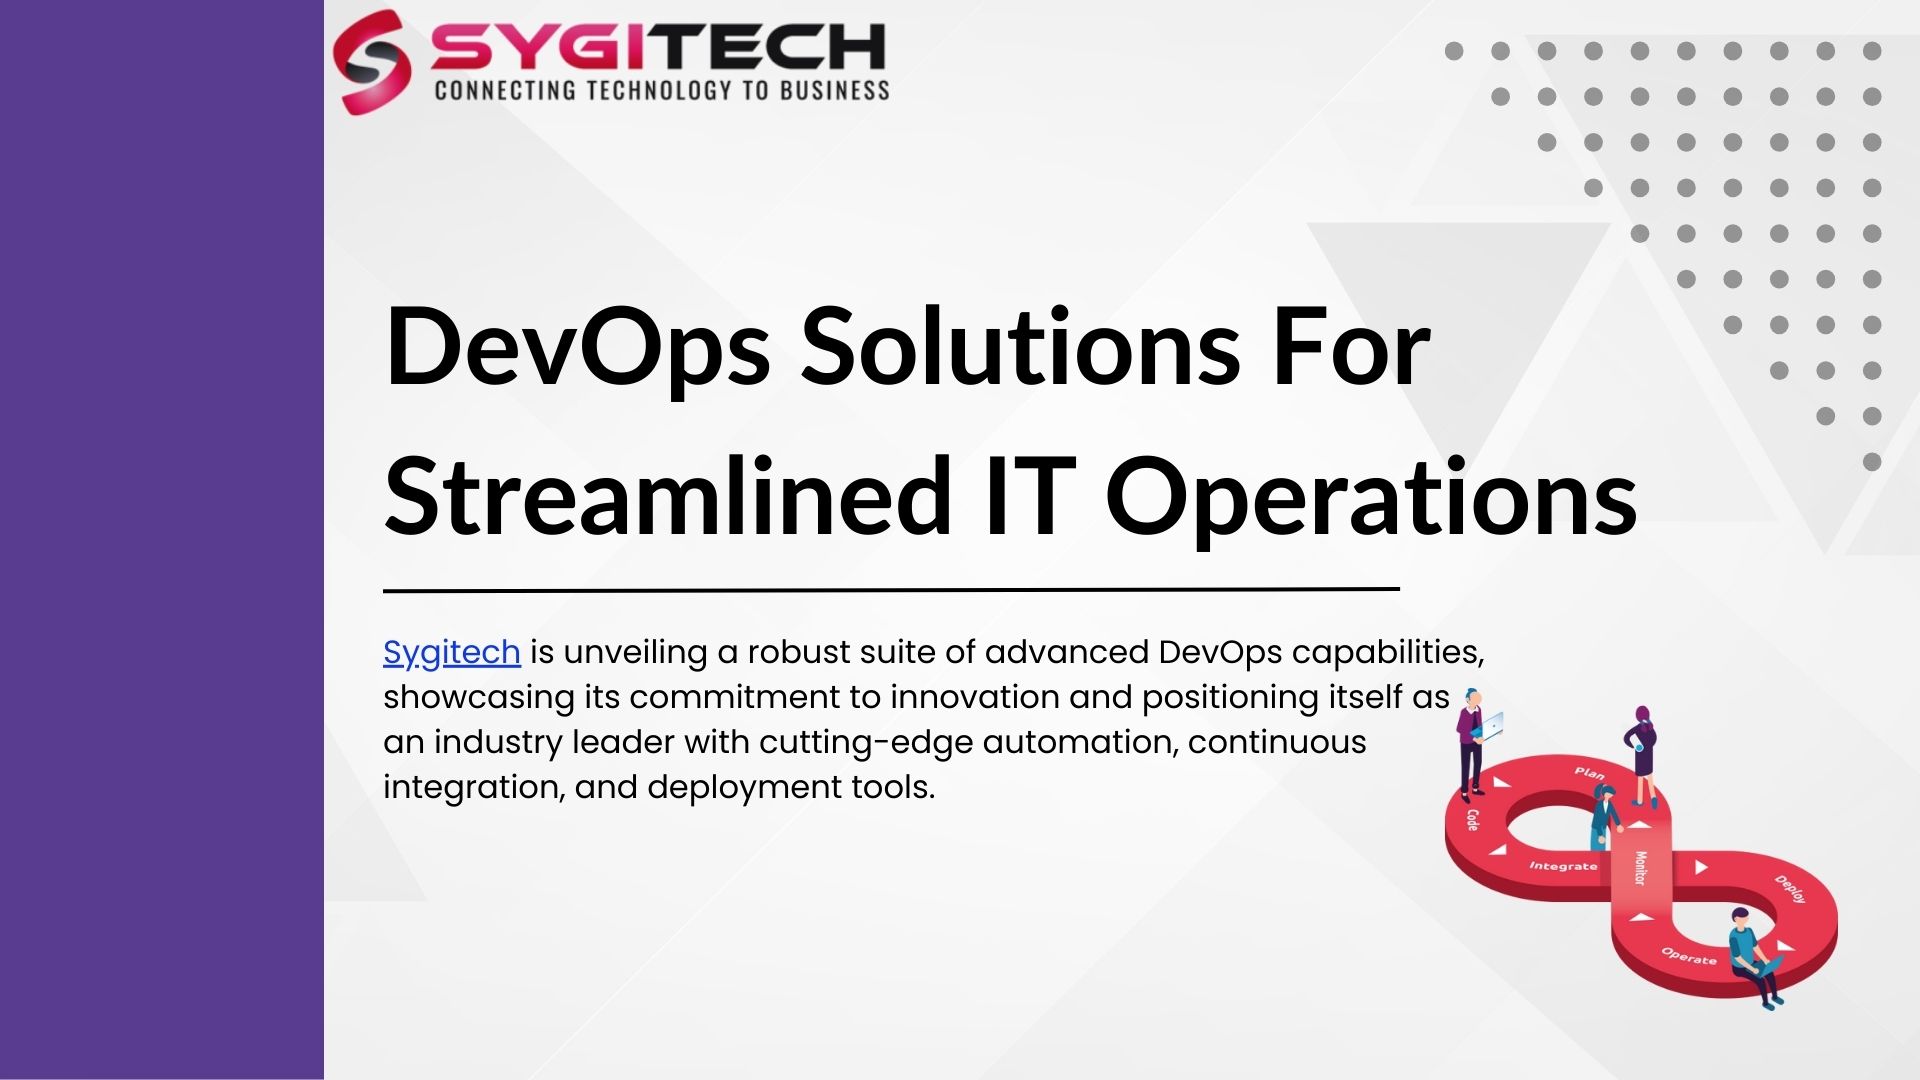 DevOps Solutions For Streamlined IT Operations